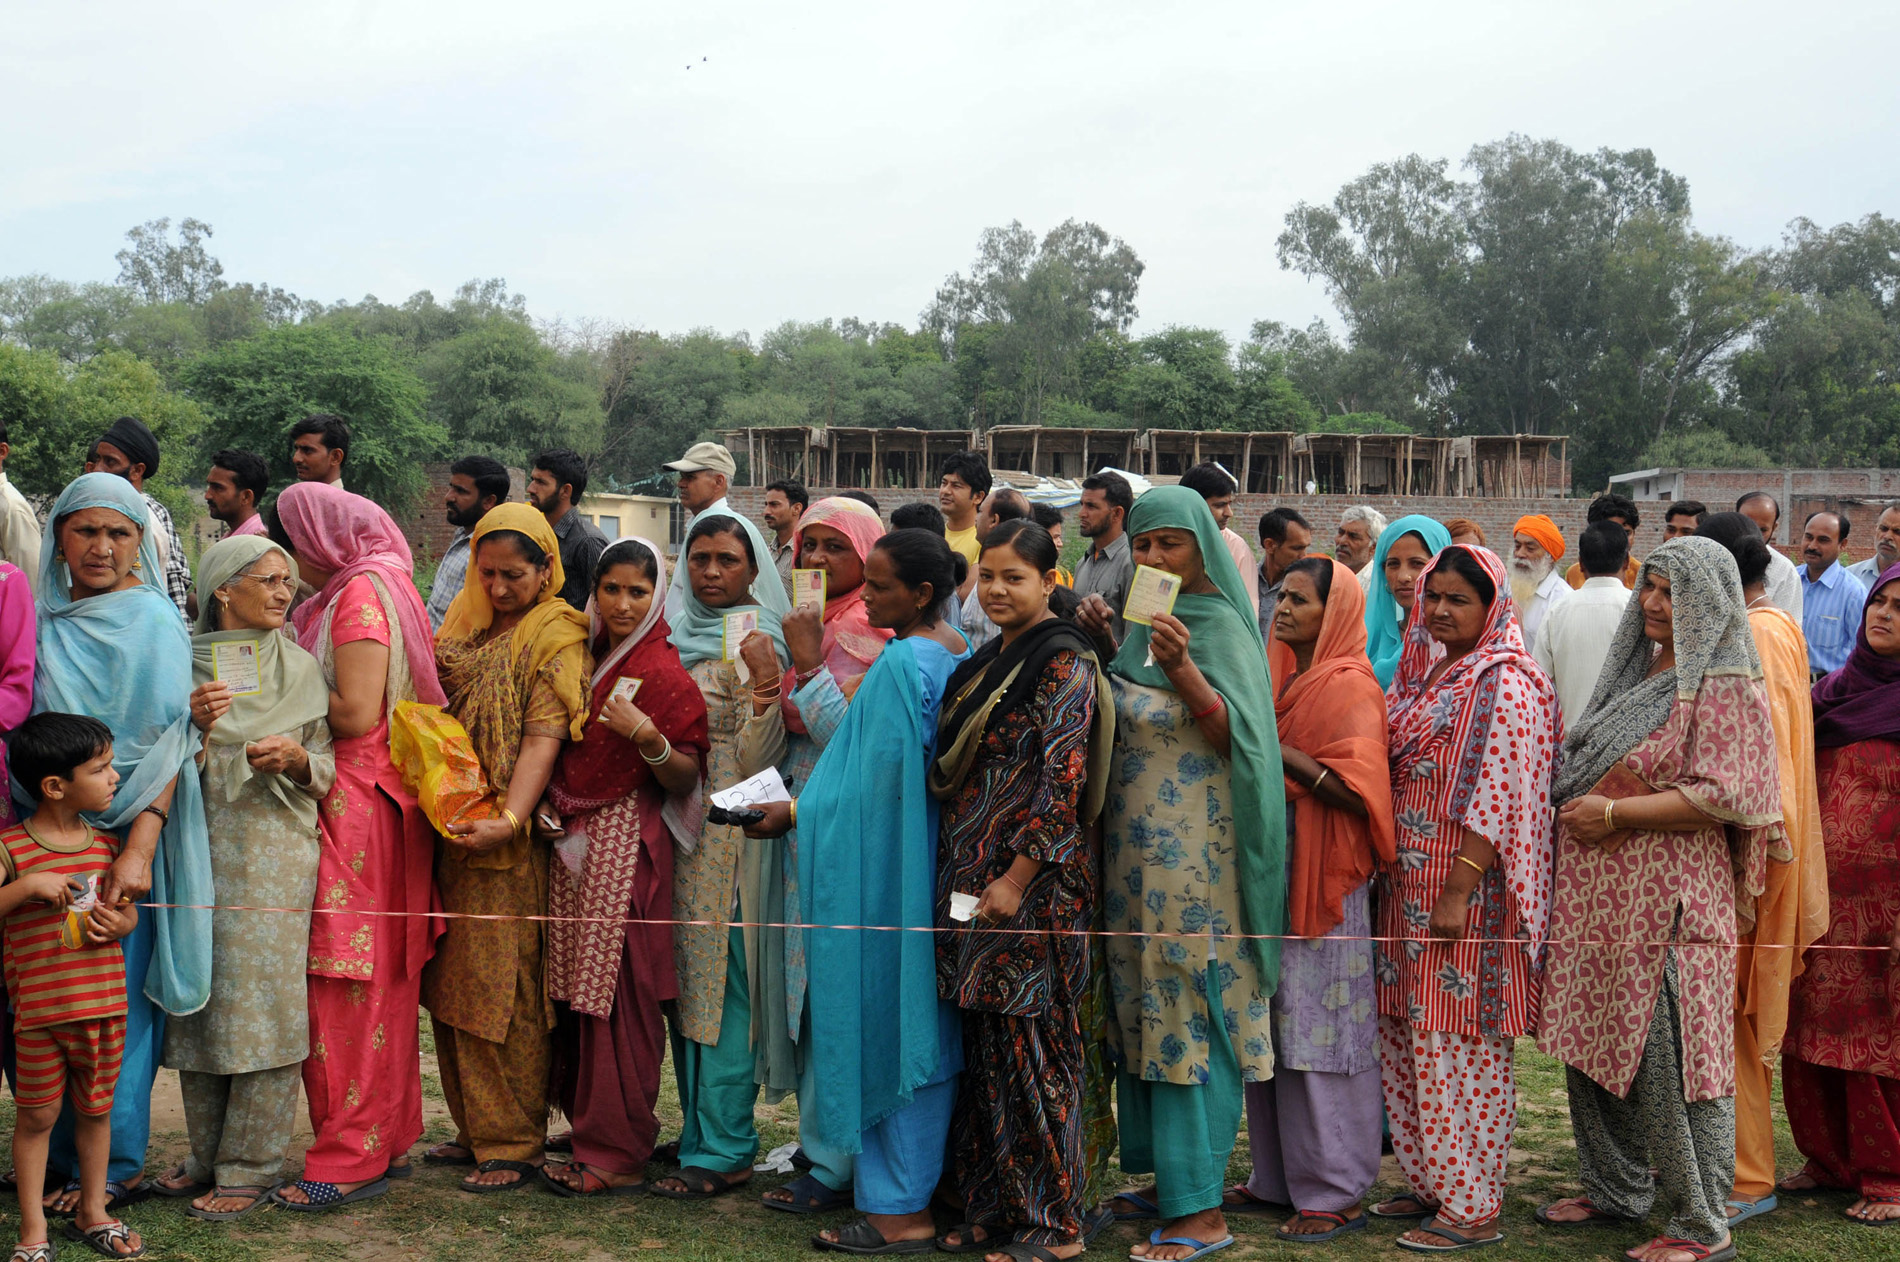 Initiatives targeting women have proven effective in mobilising support and increasing voter turnout, but questions linger about their impact on essential sectors like education and healthcare. : Public.Resource.Org CC BY 2.0